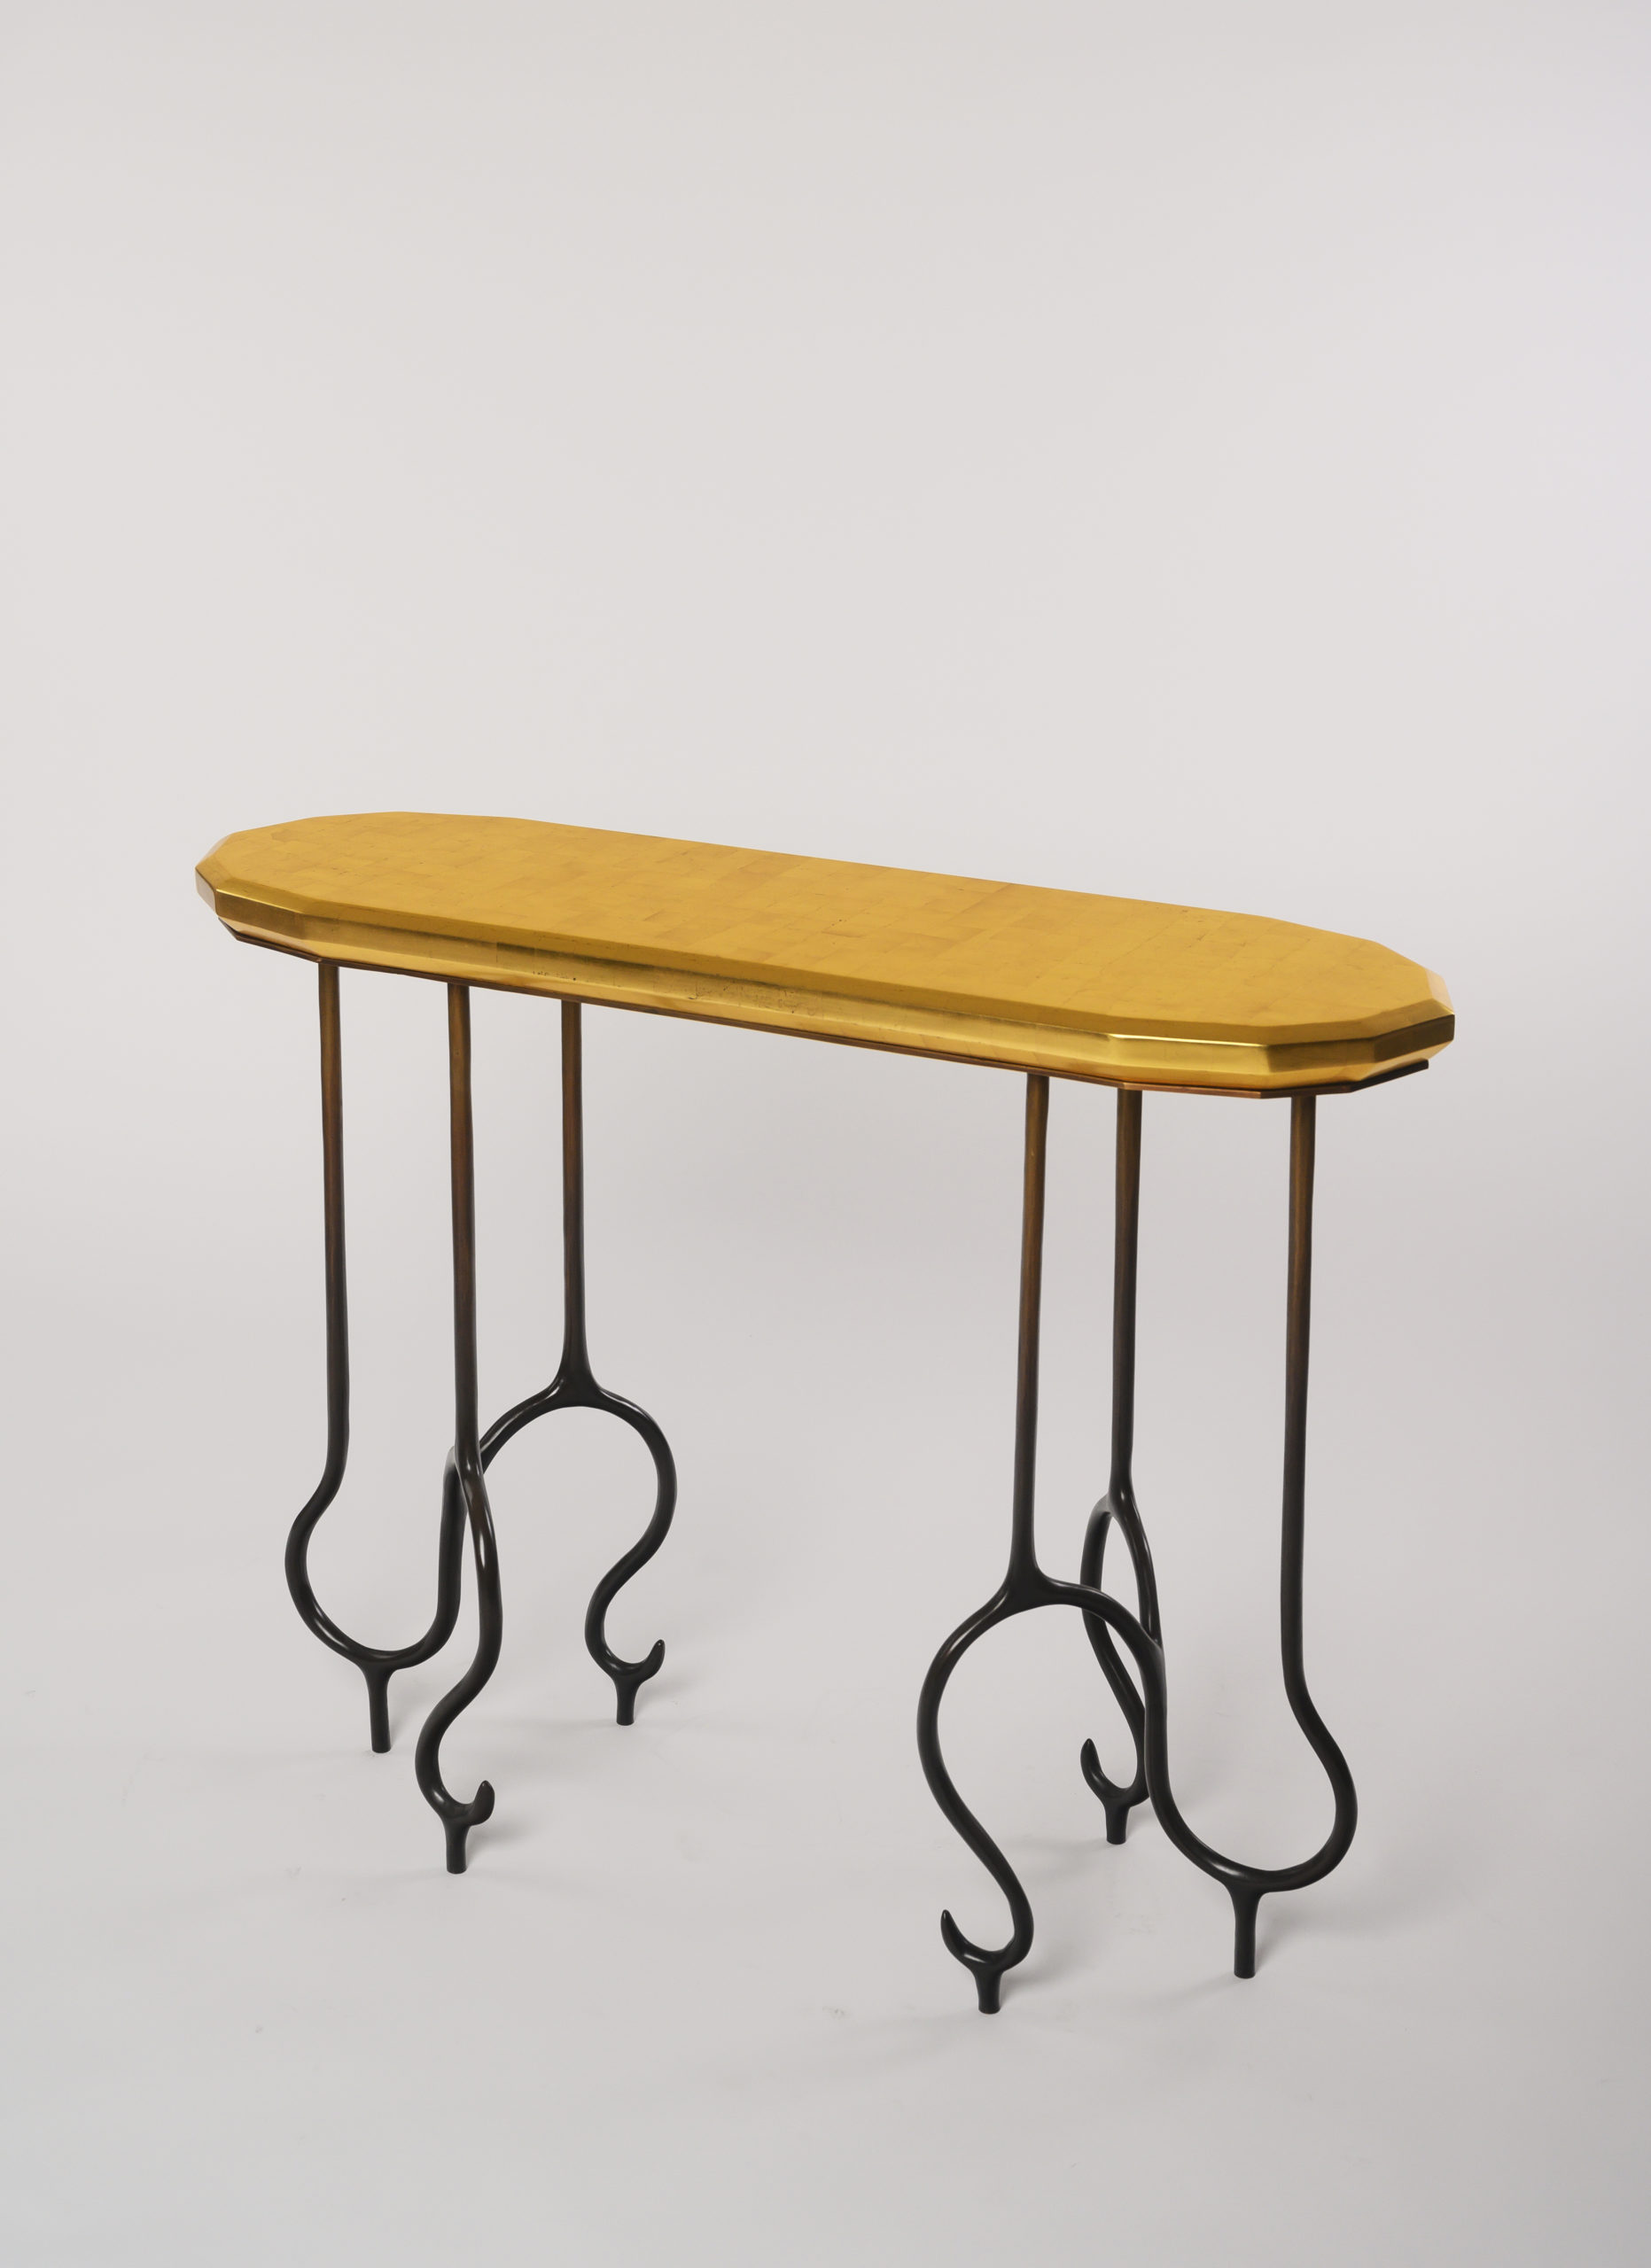 NYDC_WNWN_products_david_sutherland_elan_atelier_Faroh_Console_BEE_5106